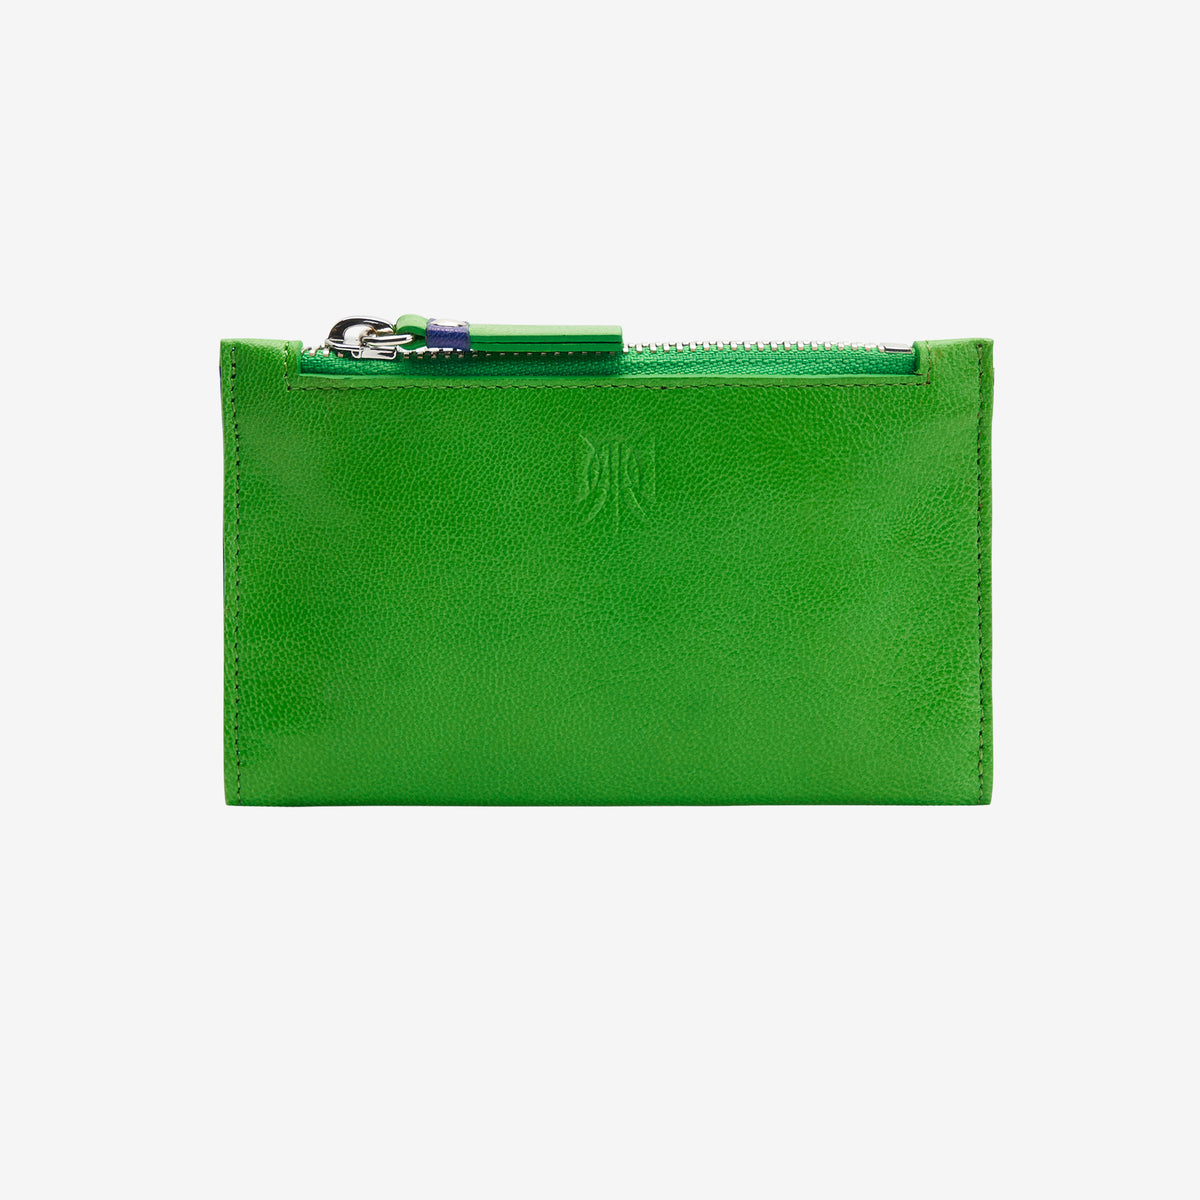     tusk-383-leather-slim-card-case-with-zip-coin-pocket-grass-and-indigo-front